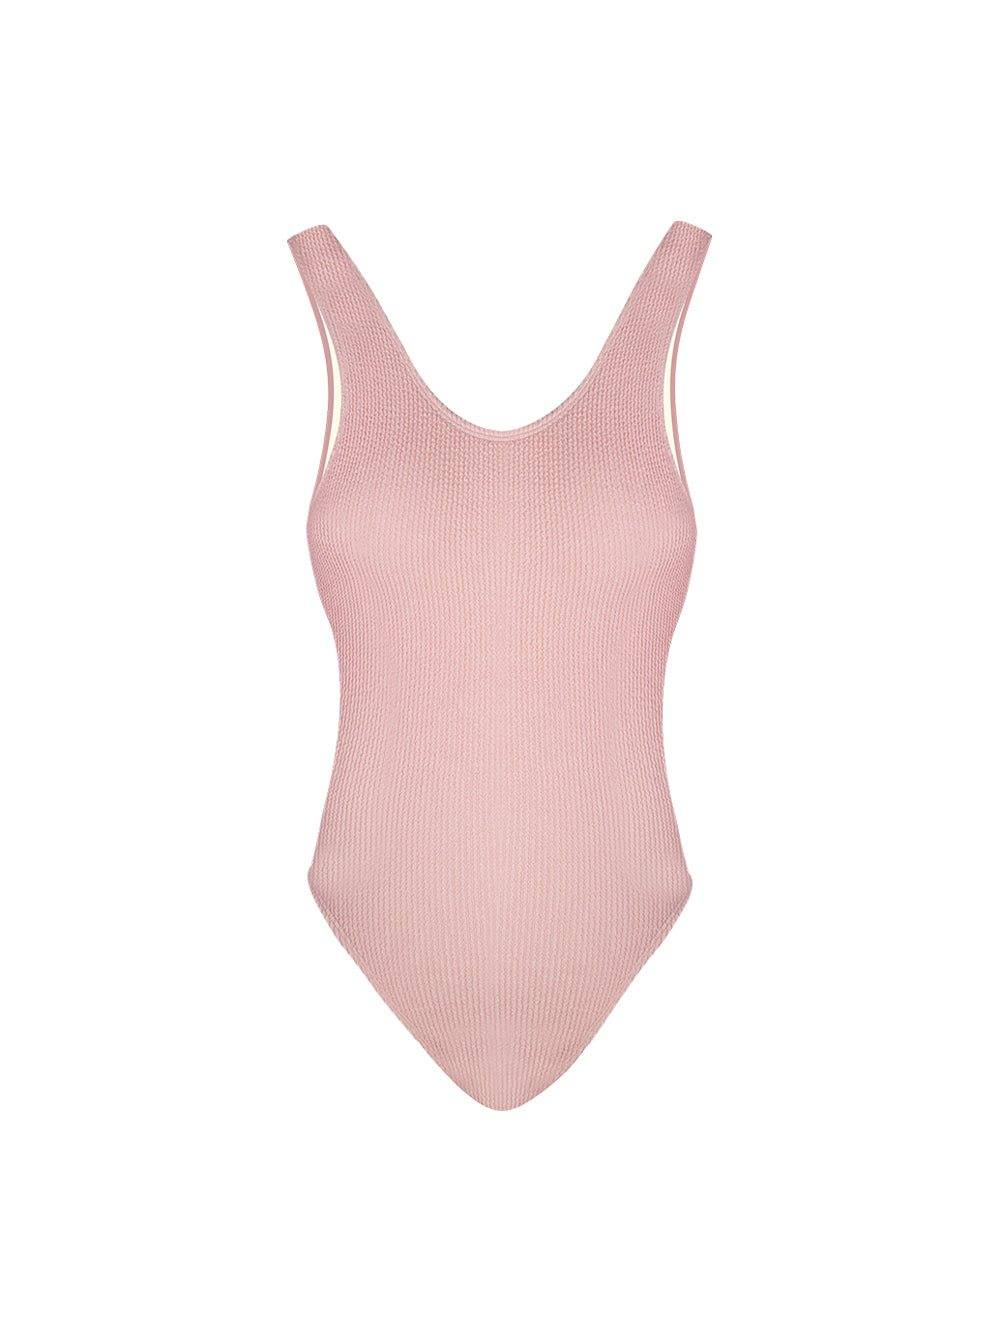 Backless One Piece Swimsuit - Salmon - OCEAN MYSTERY